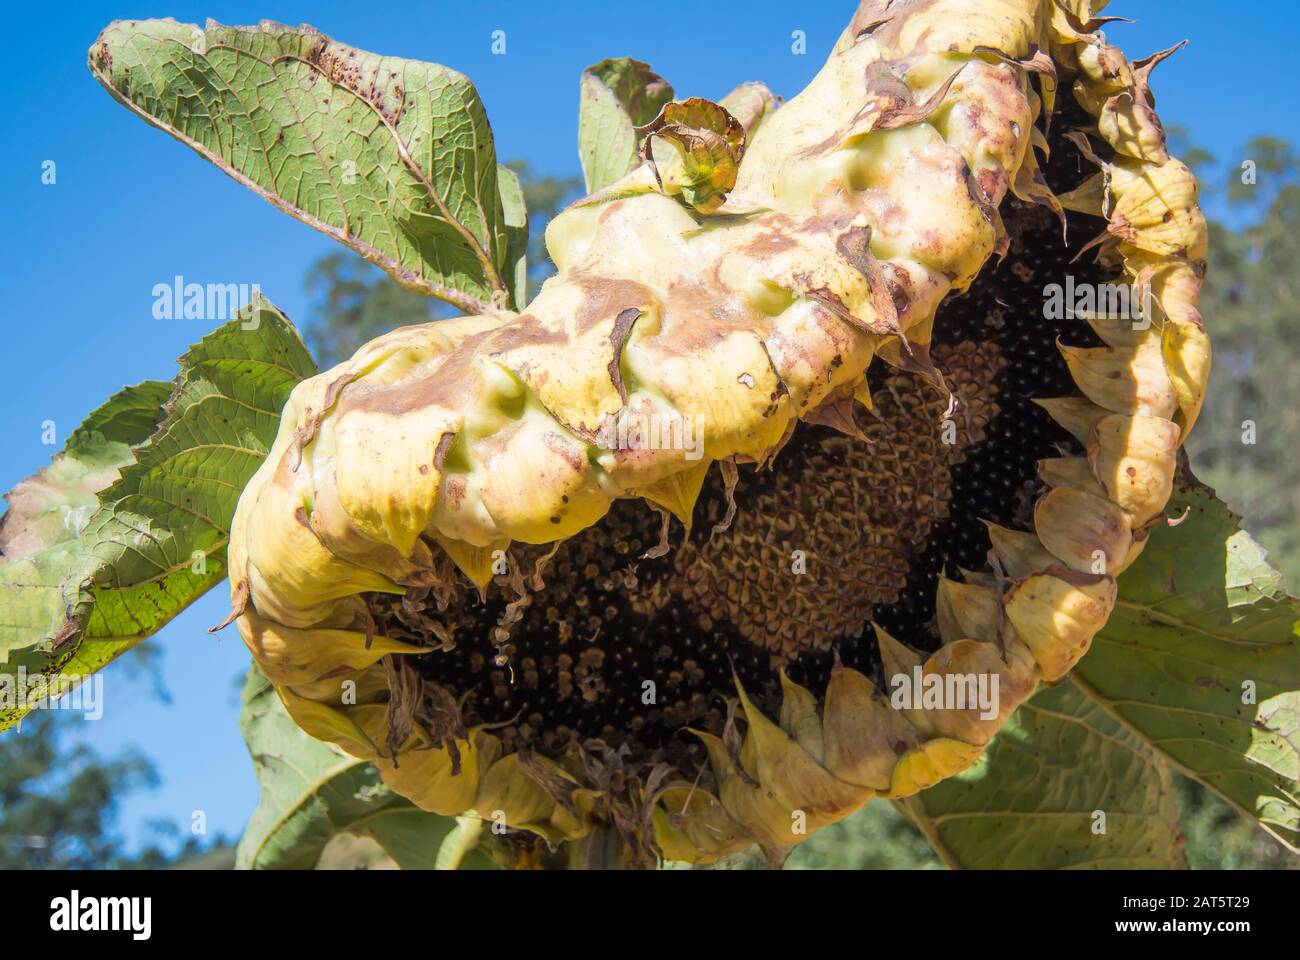 Sunflower in Its Last Days Stock Photo